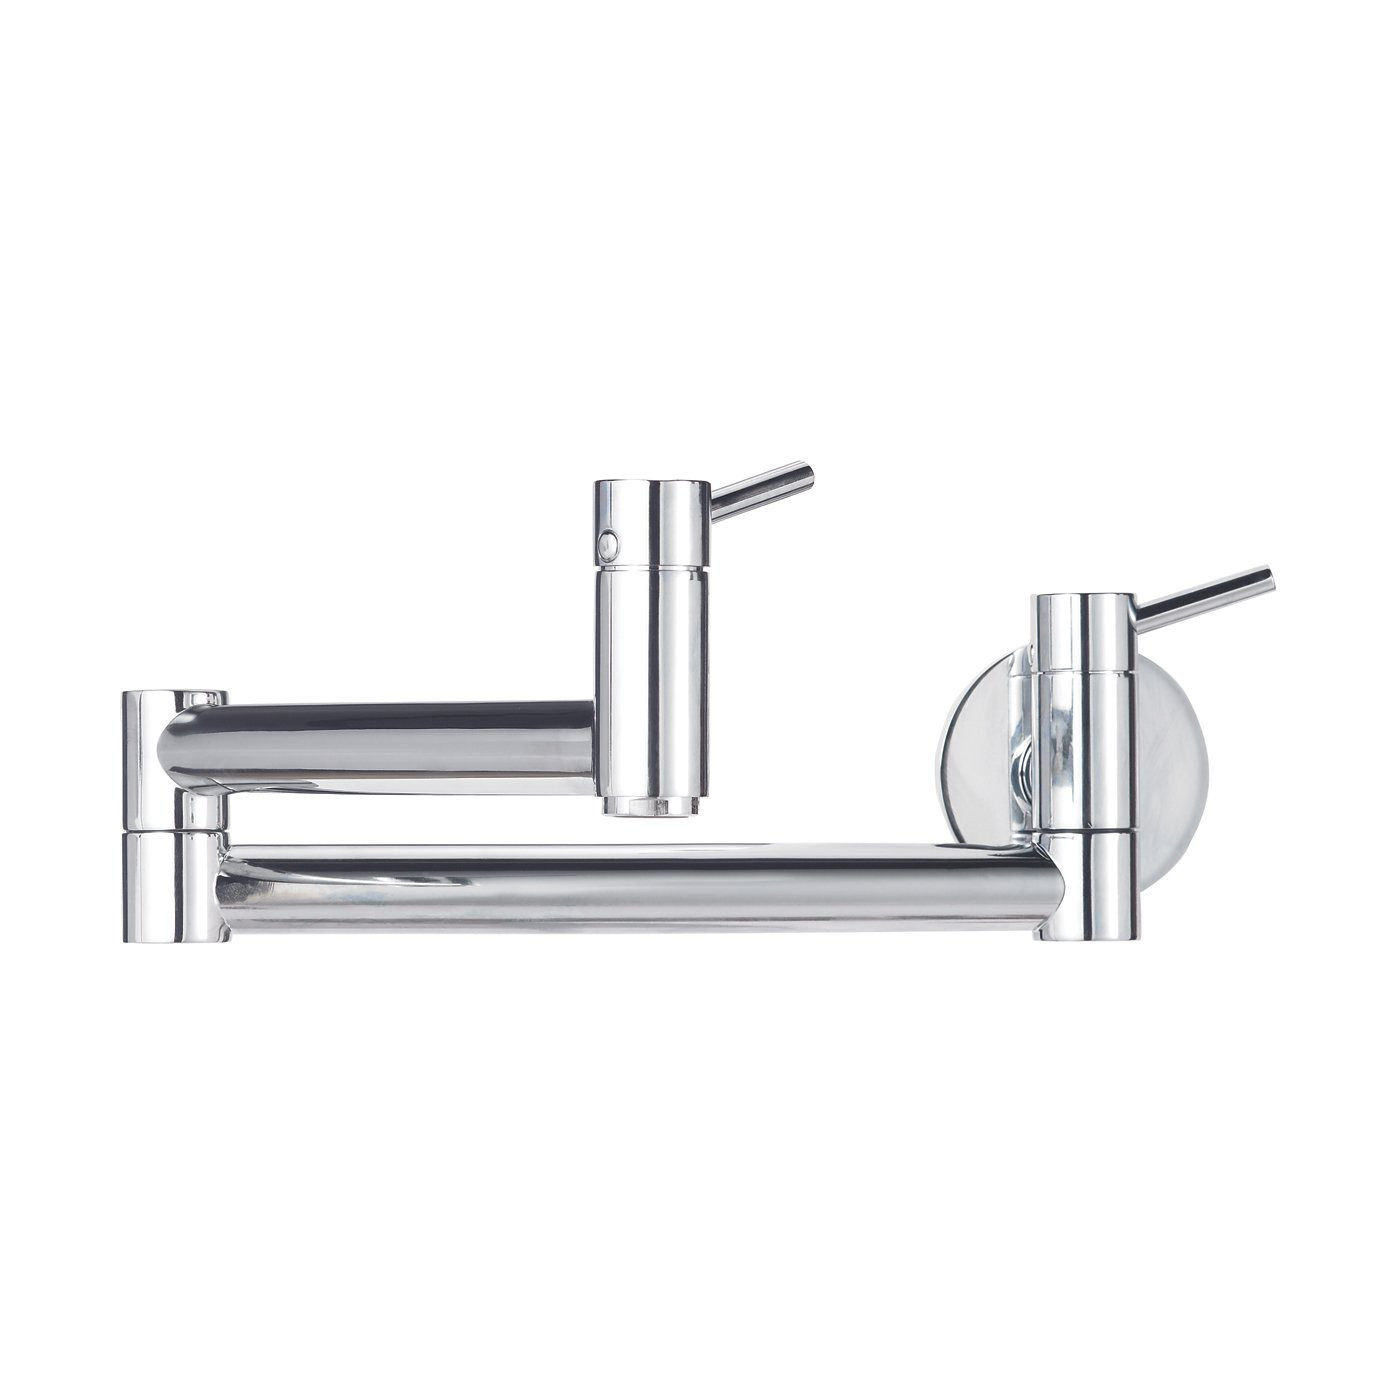 Cantata Wall Mounted Pot Filler In Polished Chrome